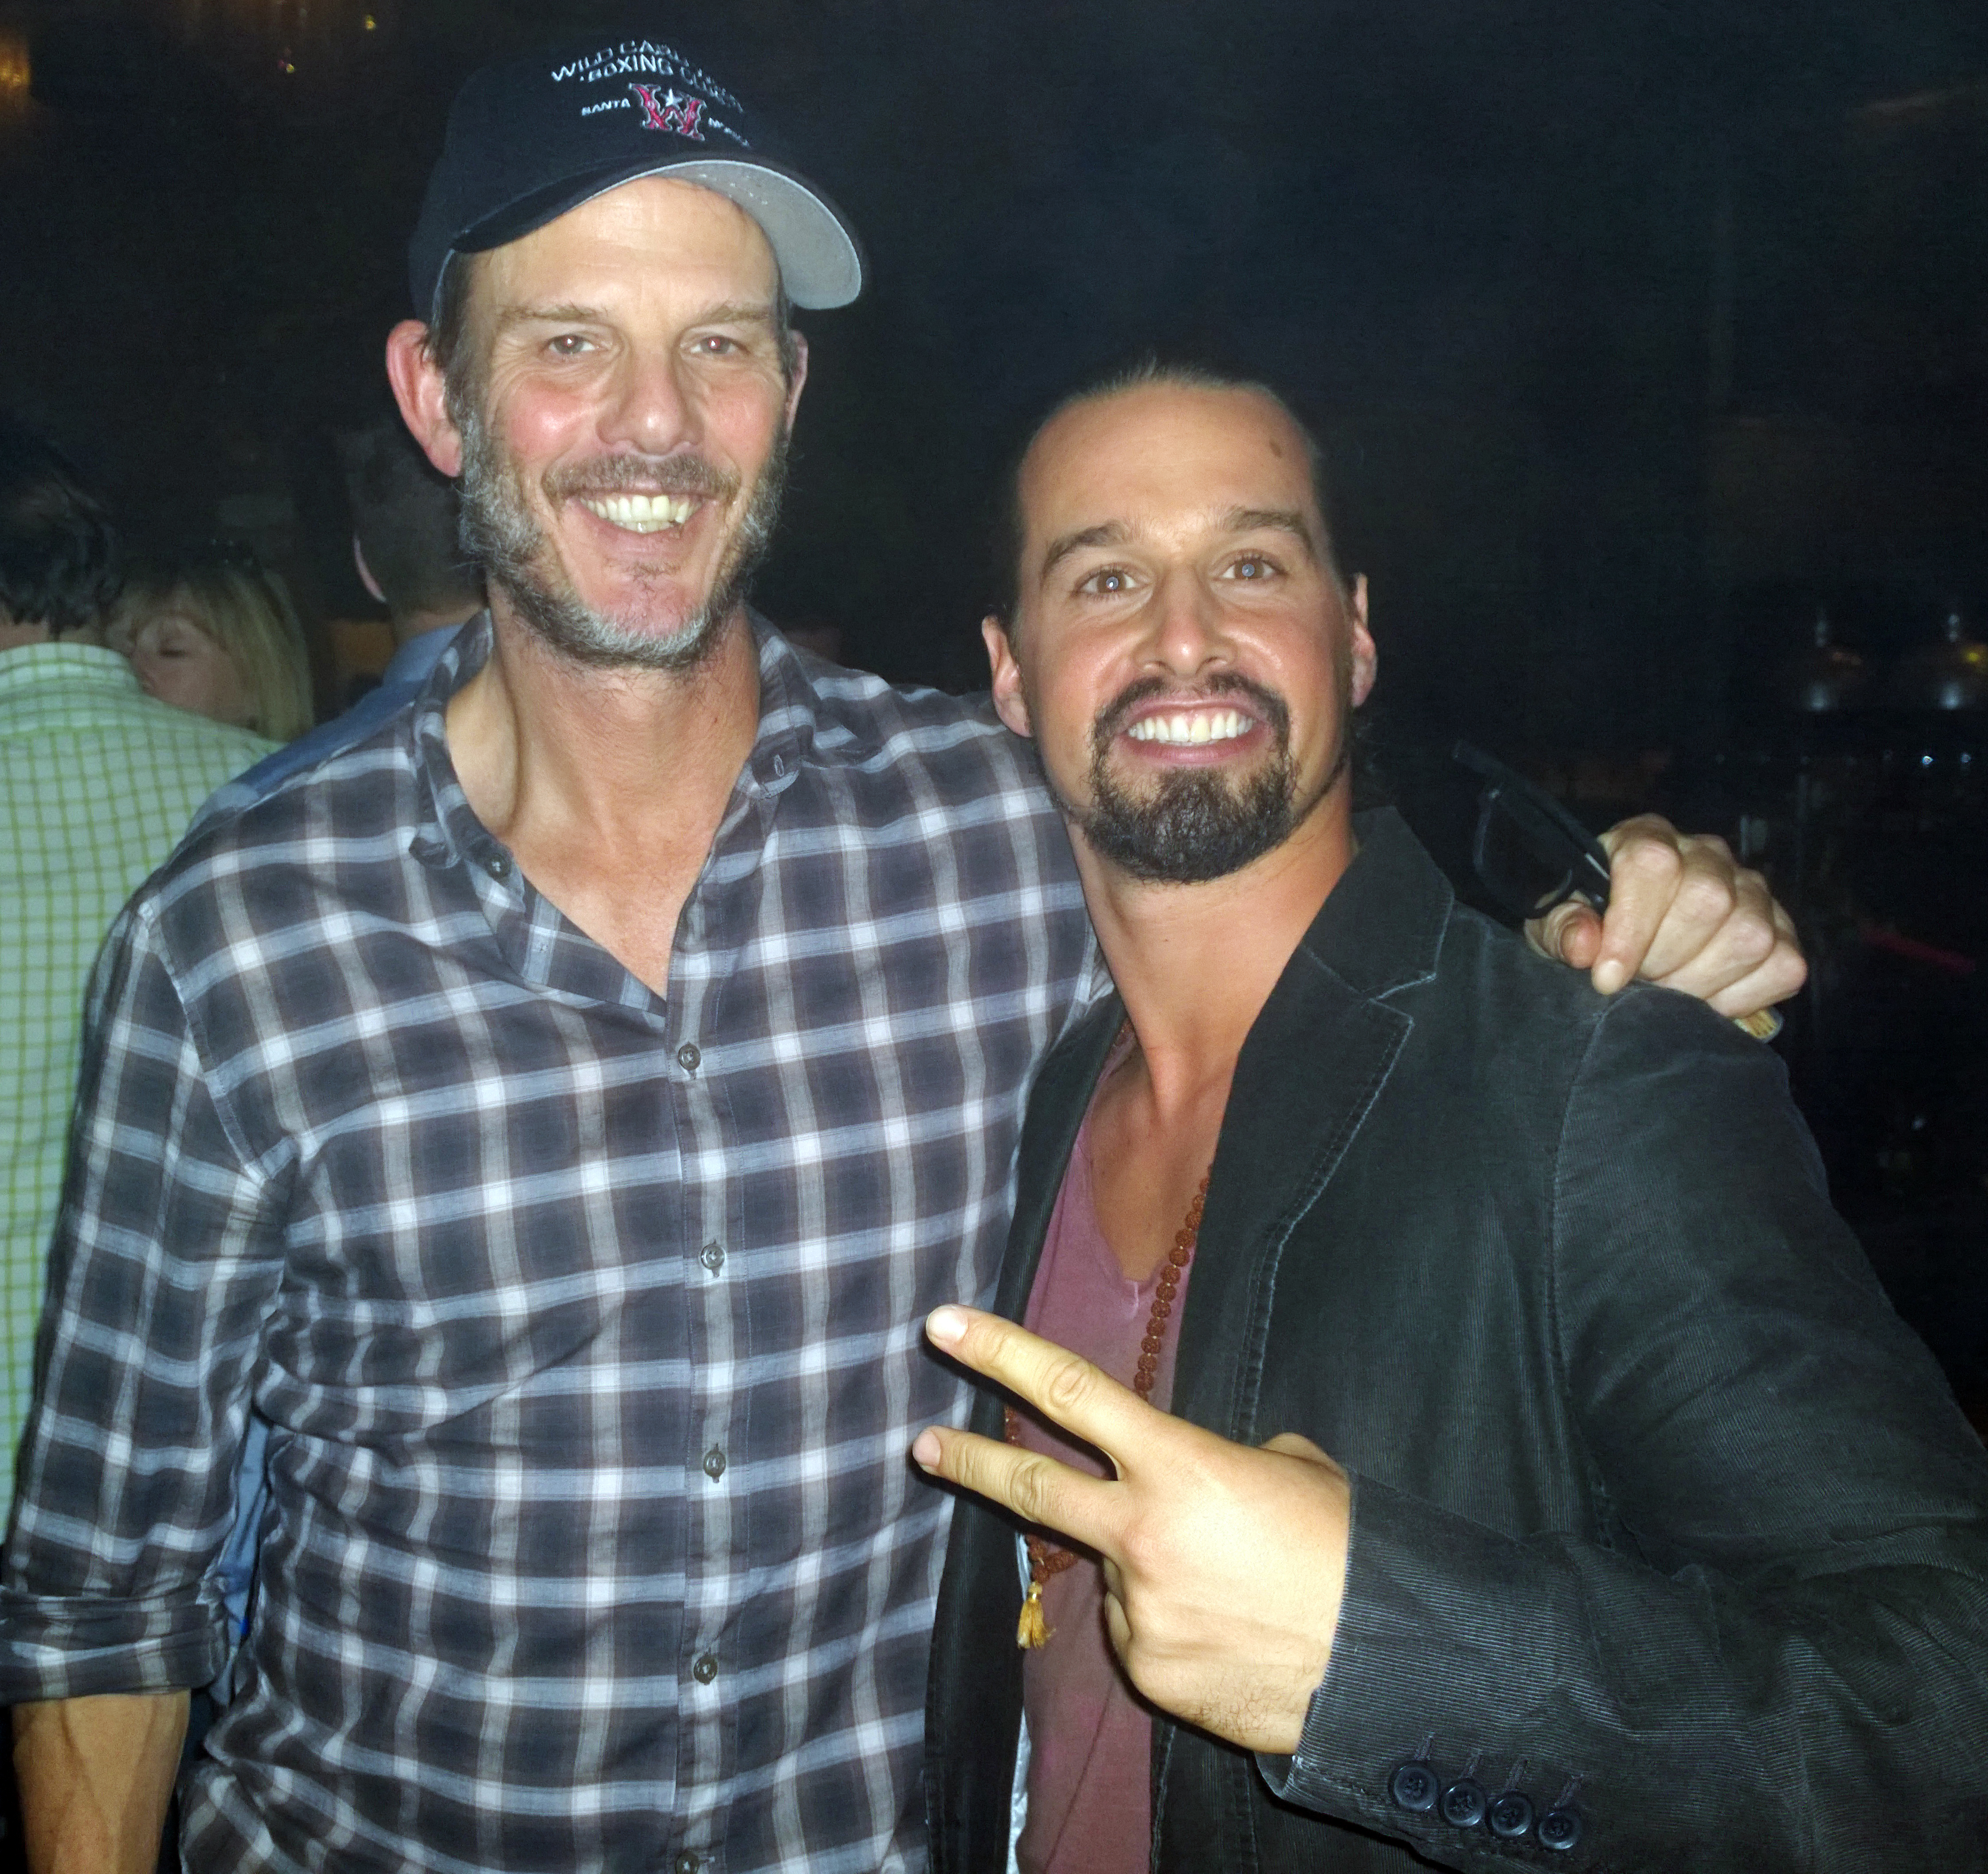 Peter Berg (Director) and Sancho Martin-Lead Movement Actor, Dancer behind the scenes Discover Card 